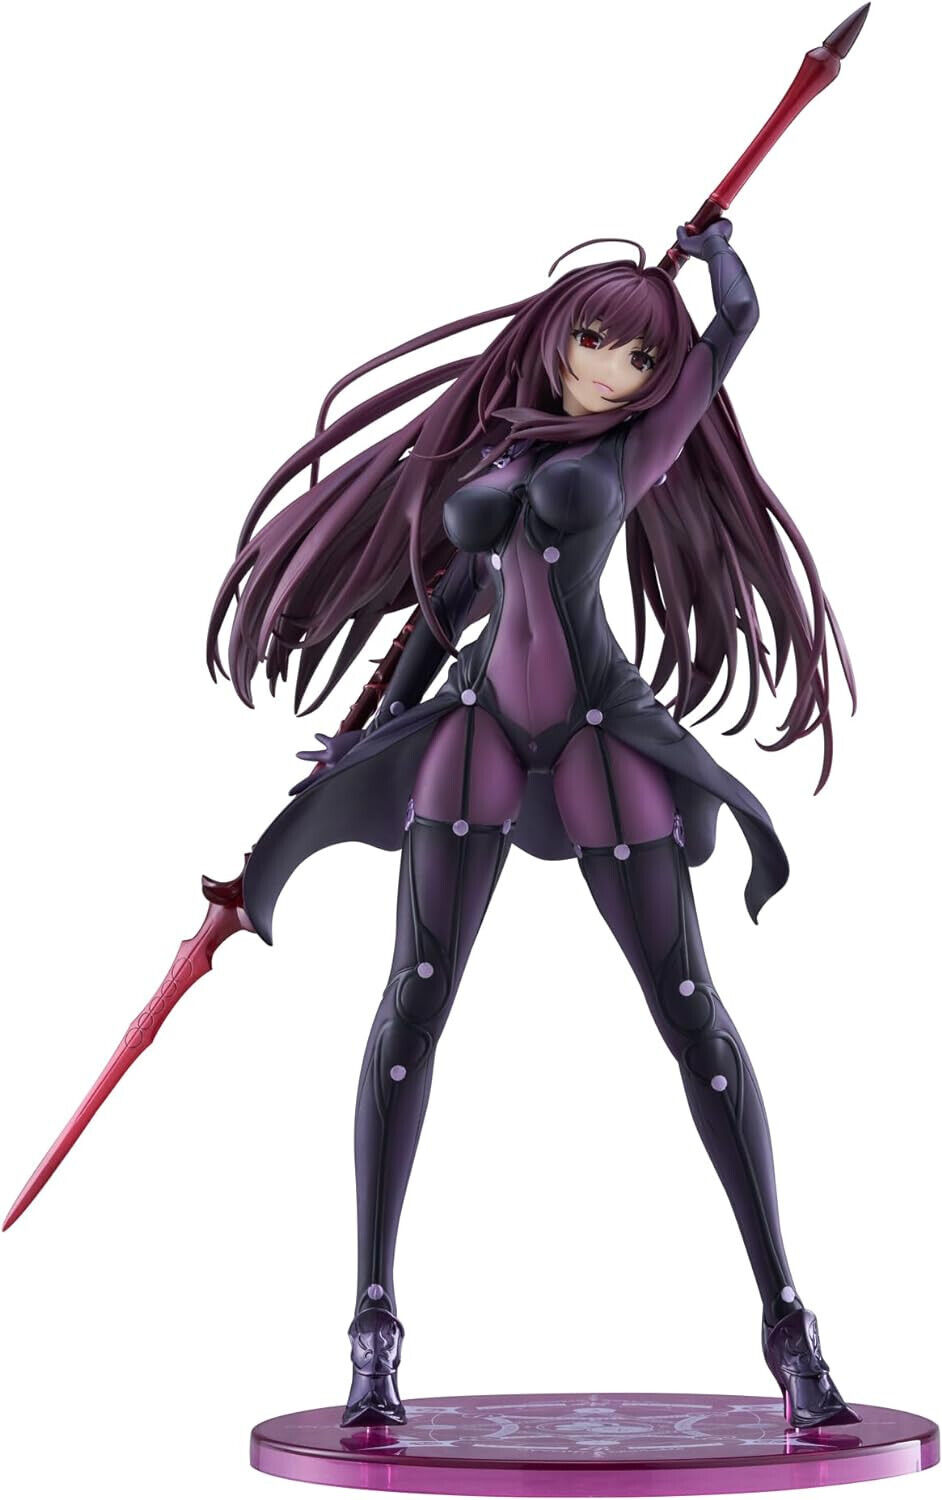 PLUM PLUMPMOA Fate/Grand Order Lancer/Scathach 1/7 PVC Figure Tracking